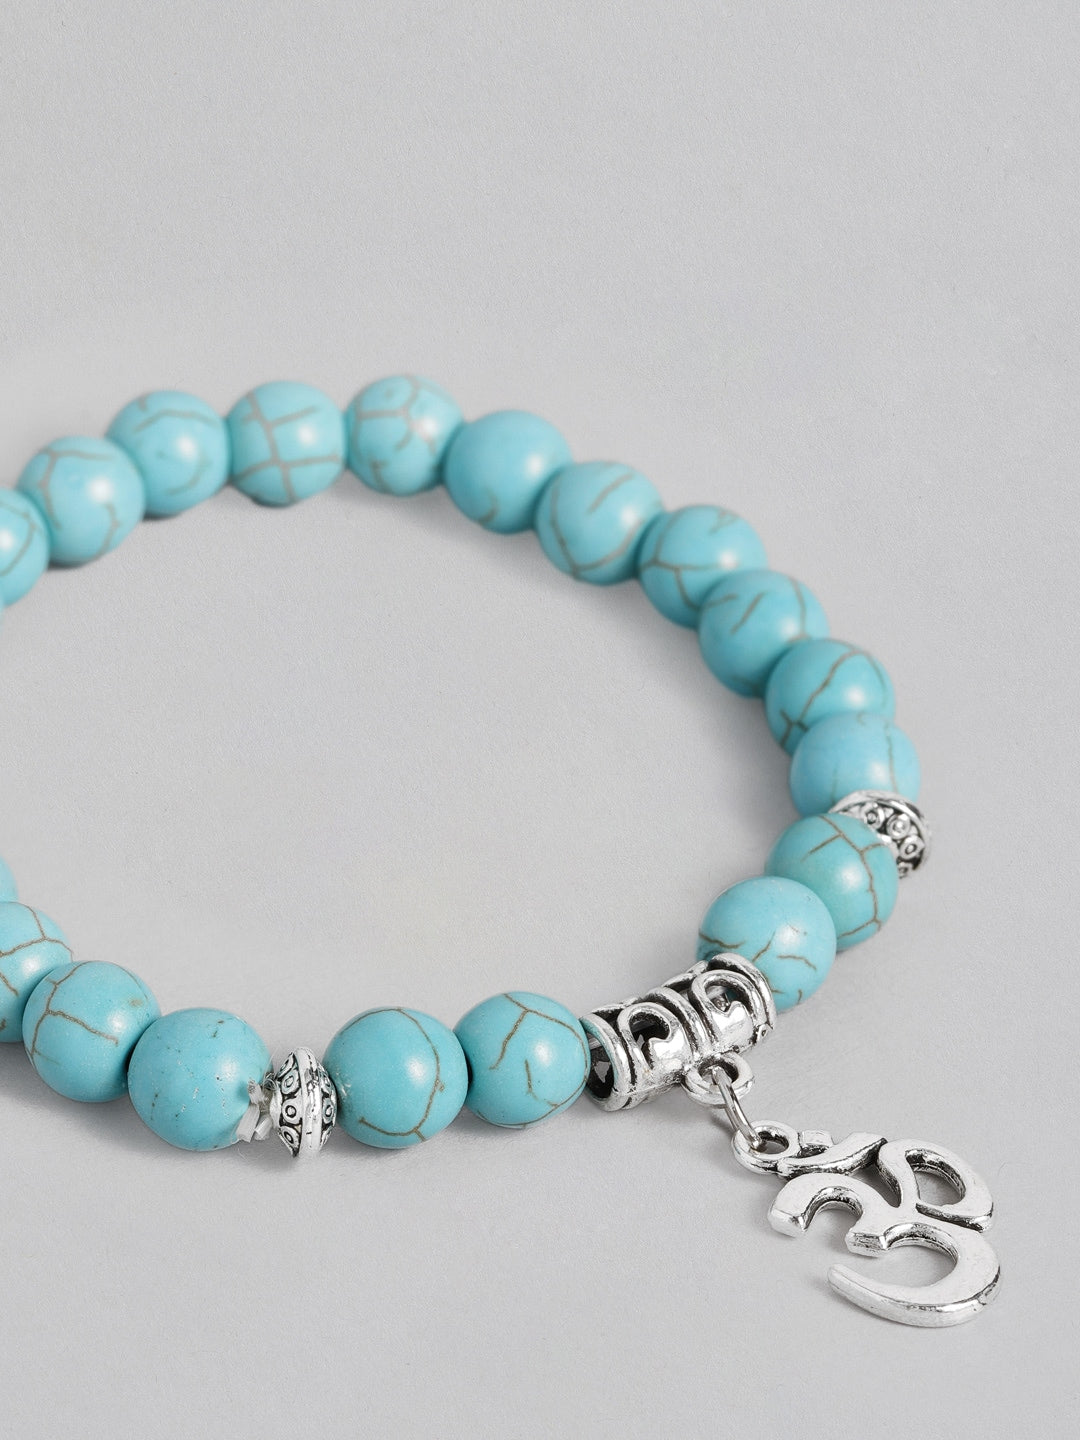 EL REGALO Men Turquoise Blue & Silver-Toned Handcrafted Om Elasticated Charm Bracelet - for Men
Style ID: 16186548